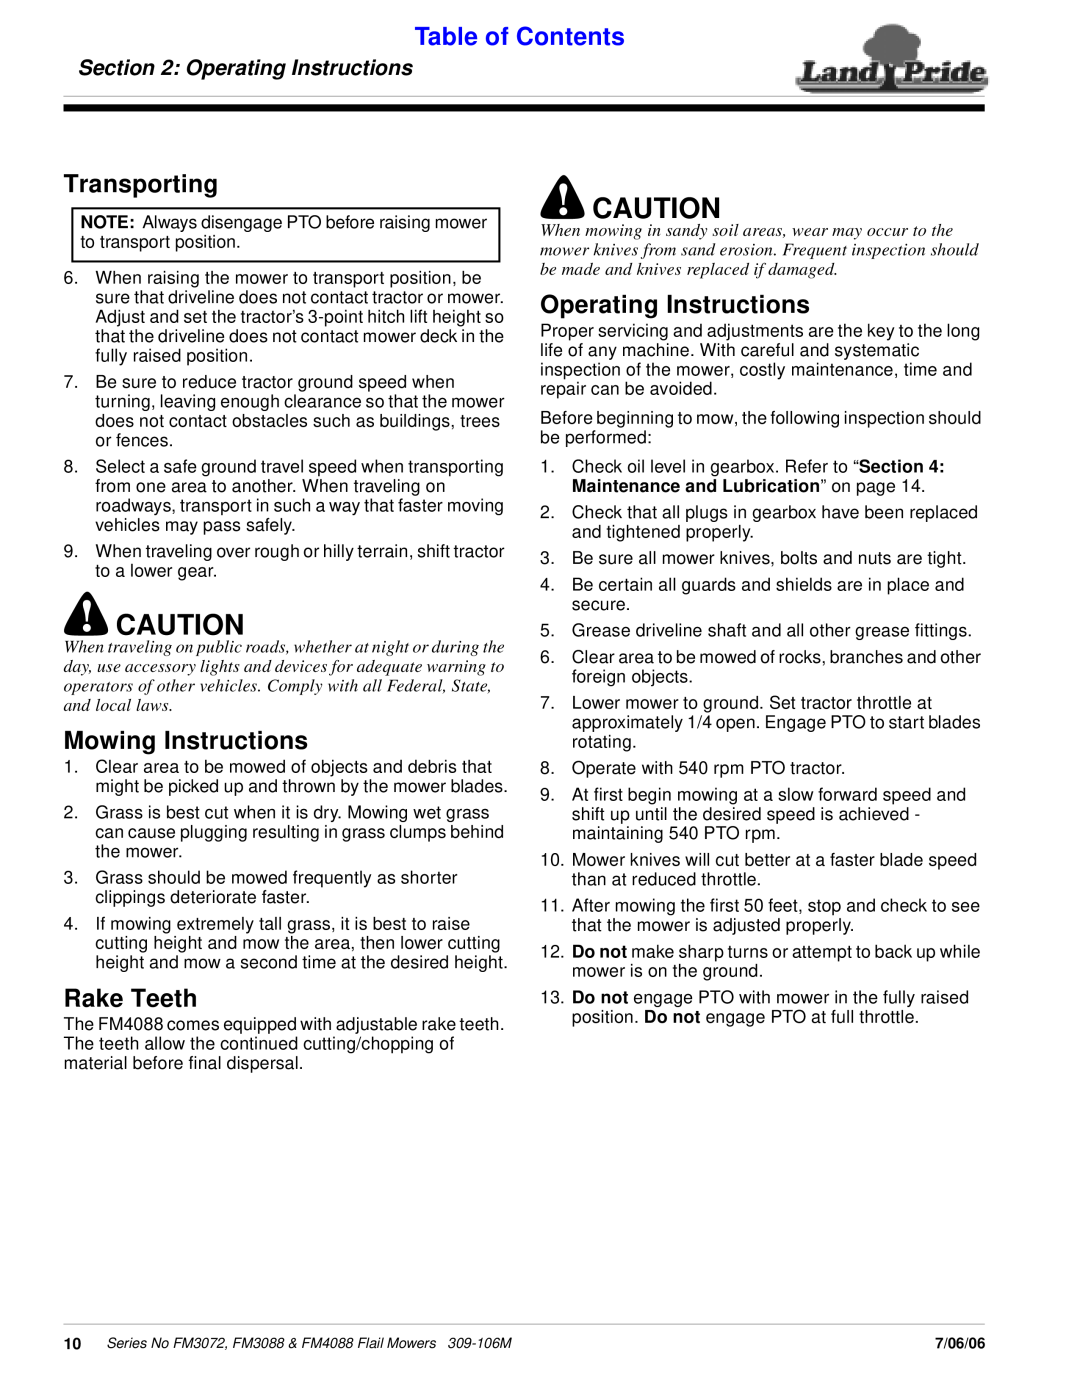 Land Pride FM4088, FM3072 manual Transporting, Mowing Instructions, Rake Teeth, Operating Instructions, Table of Contents 